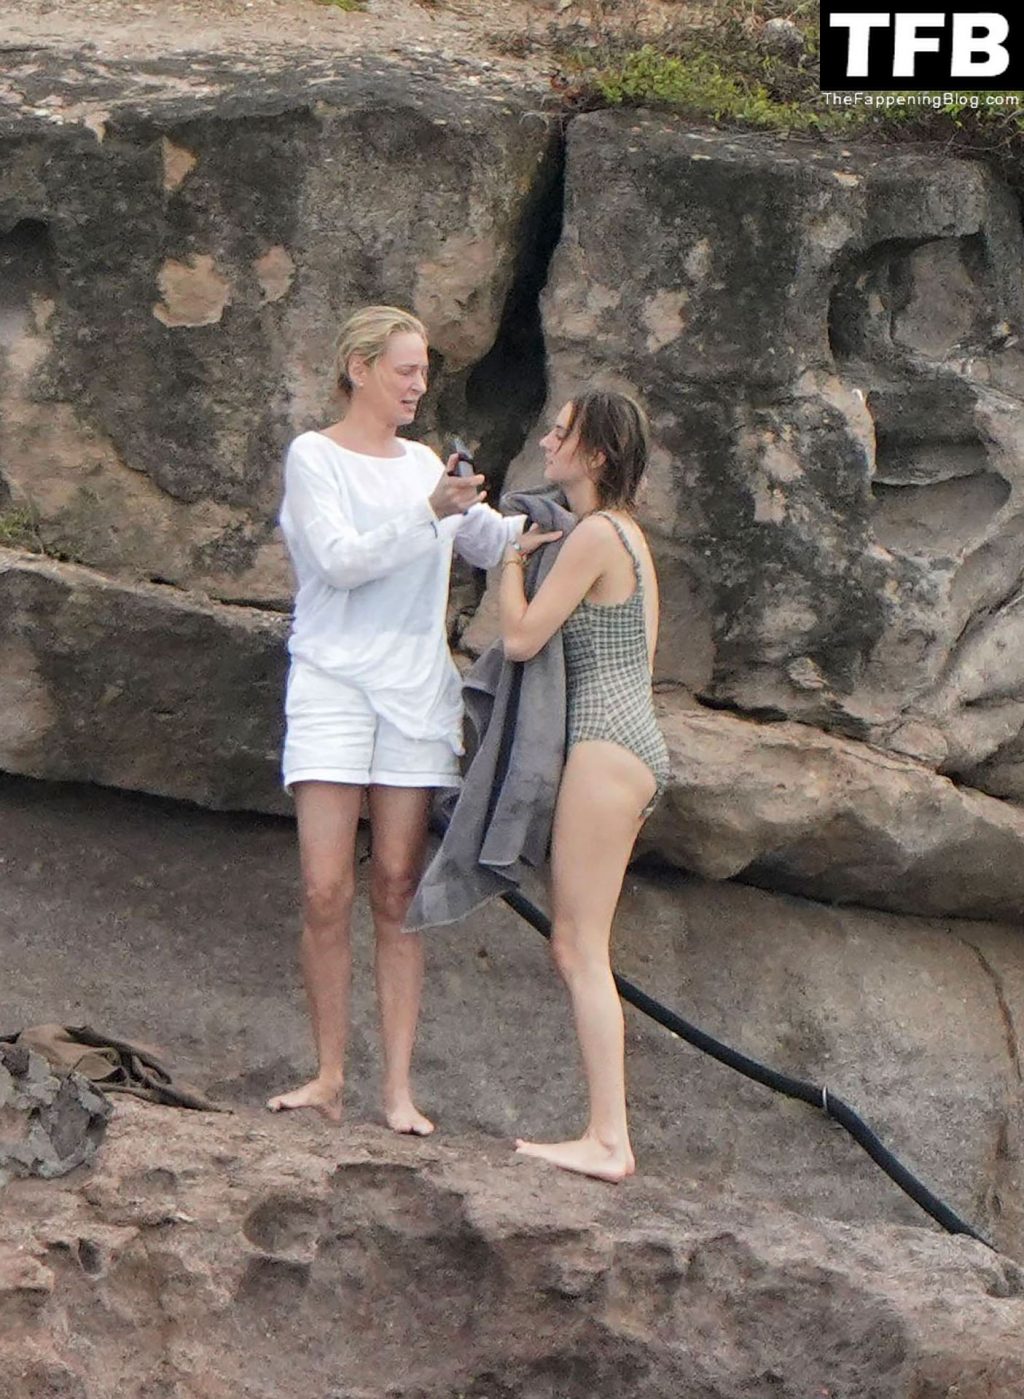 Maya Hawke Goes Nude For A Dip in St Barts (111 Photos)